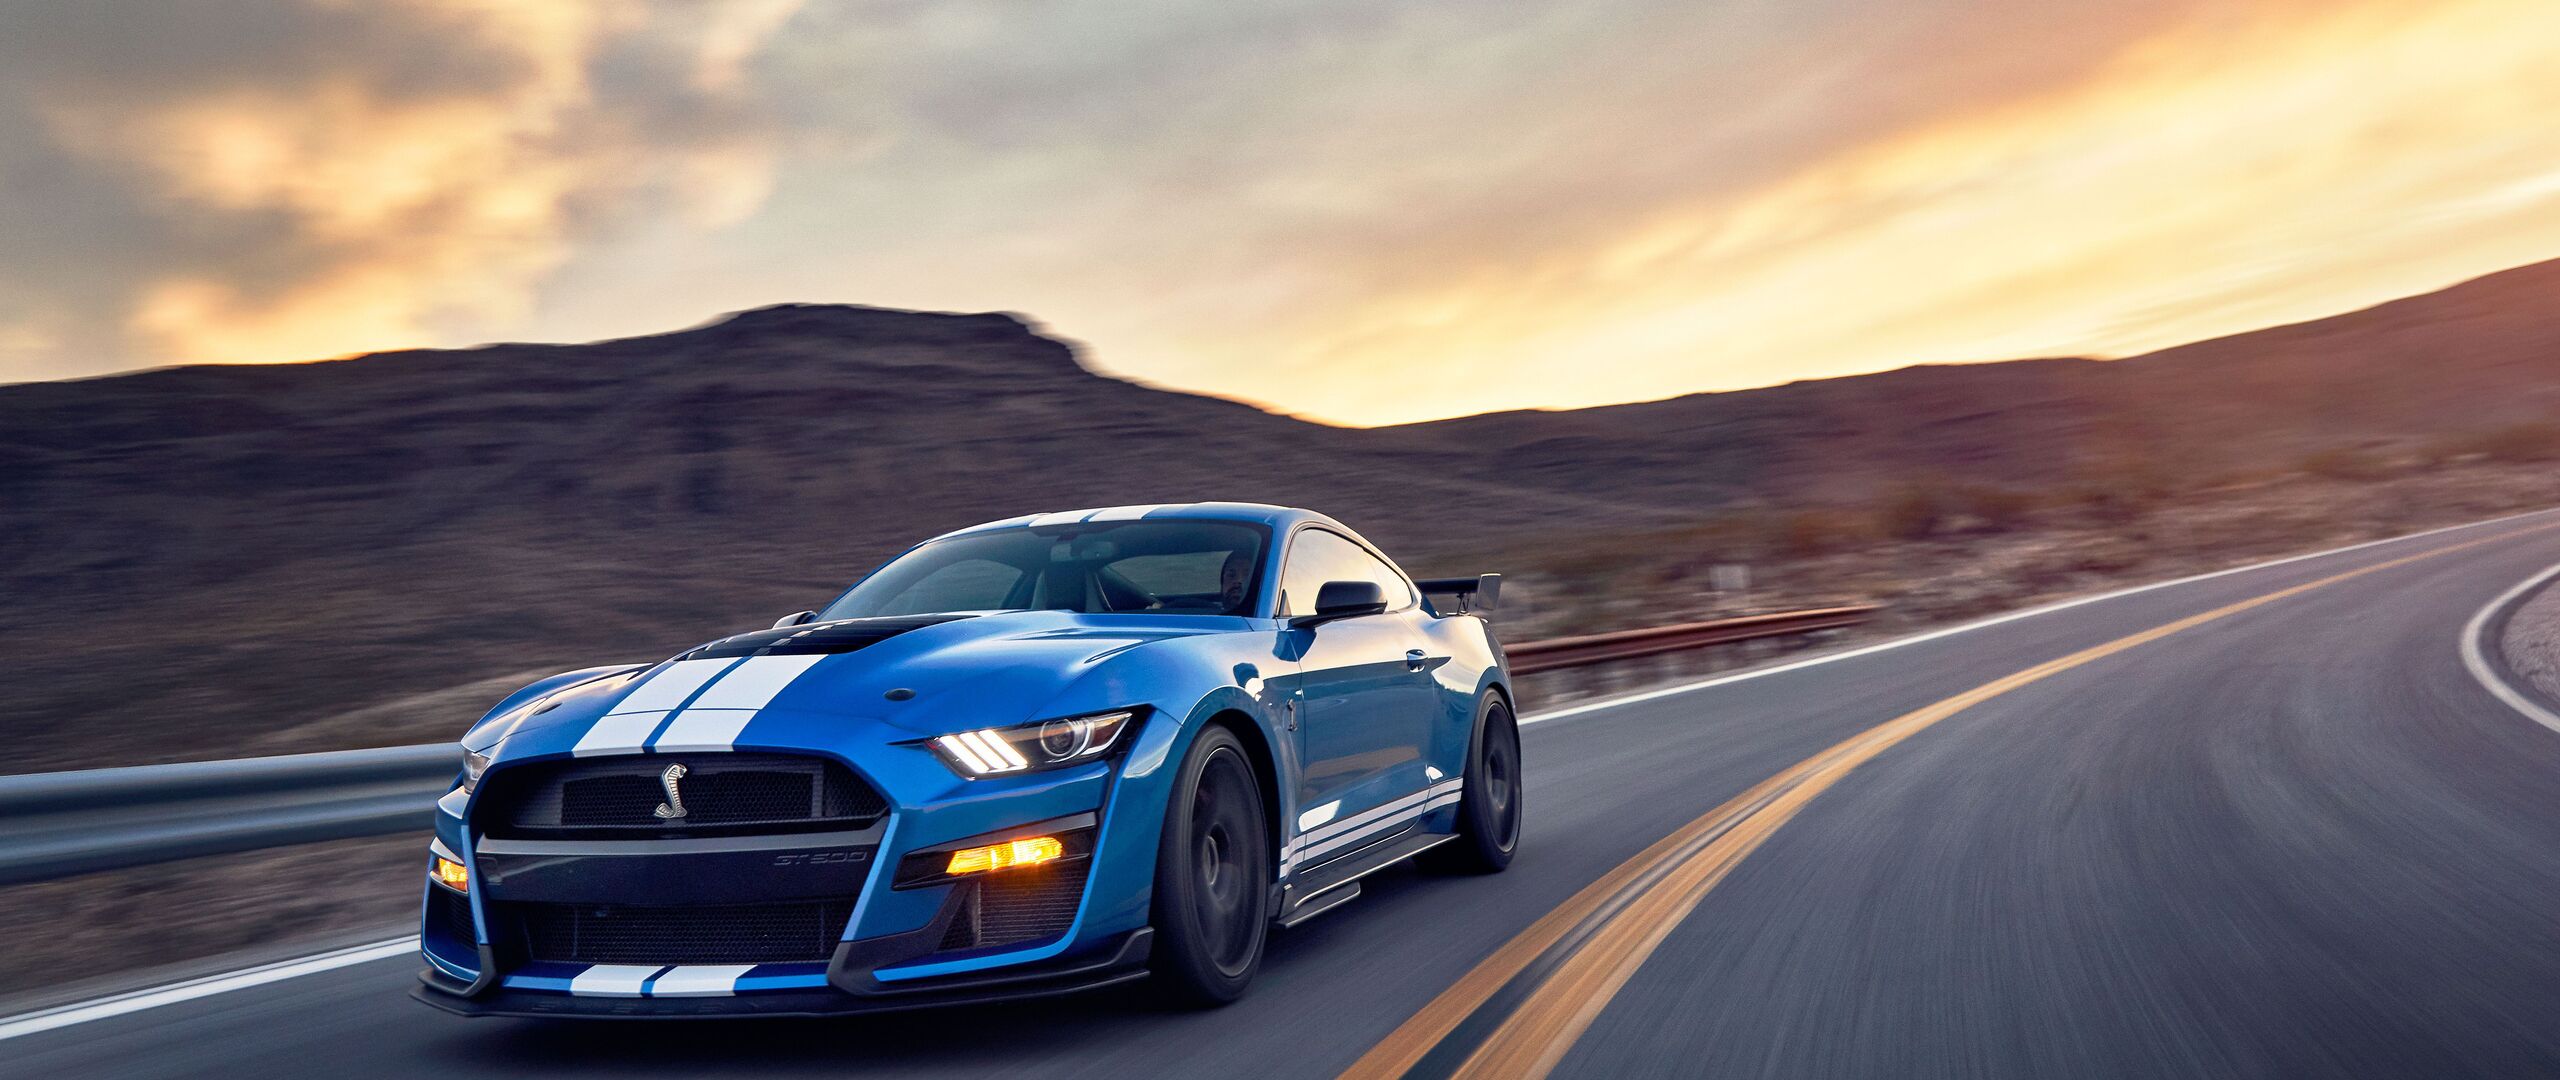 2560x1080 Ford Mustang Shelby Gt500 5k 2560x1080 Resolution Hd 4k Wallpapers Images Backgrounds Photos And Pictures